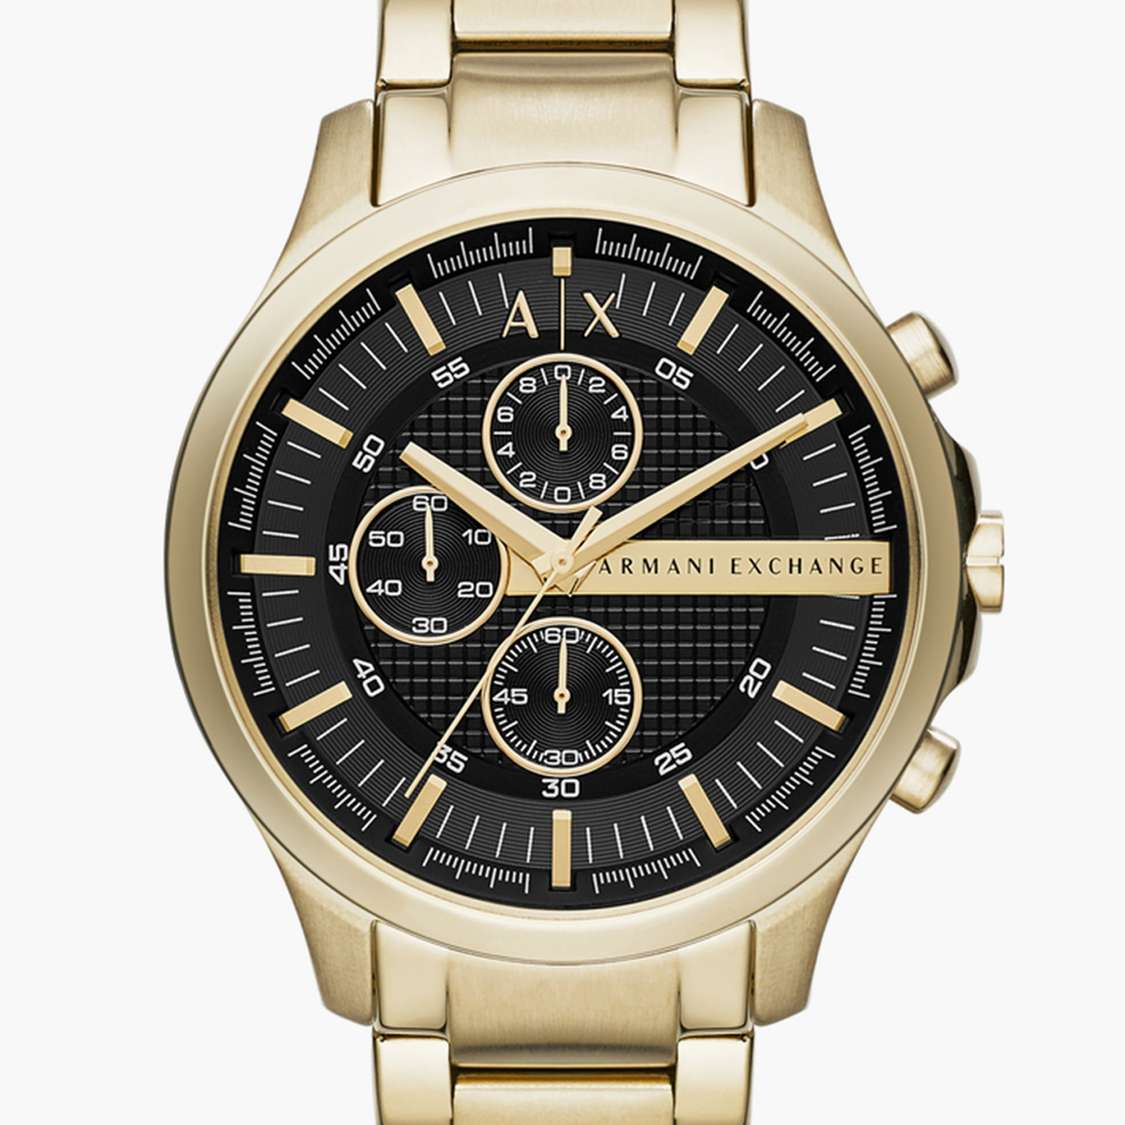 ARMANI EXCHANGE Men Chronograph Watch with Stainless Steel Strap - AX2137I - Kamal Watch Company